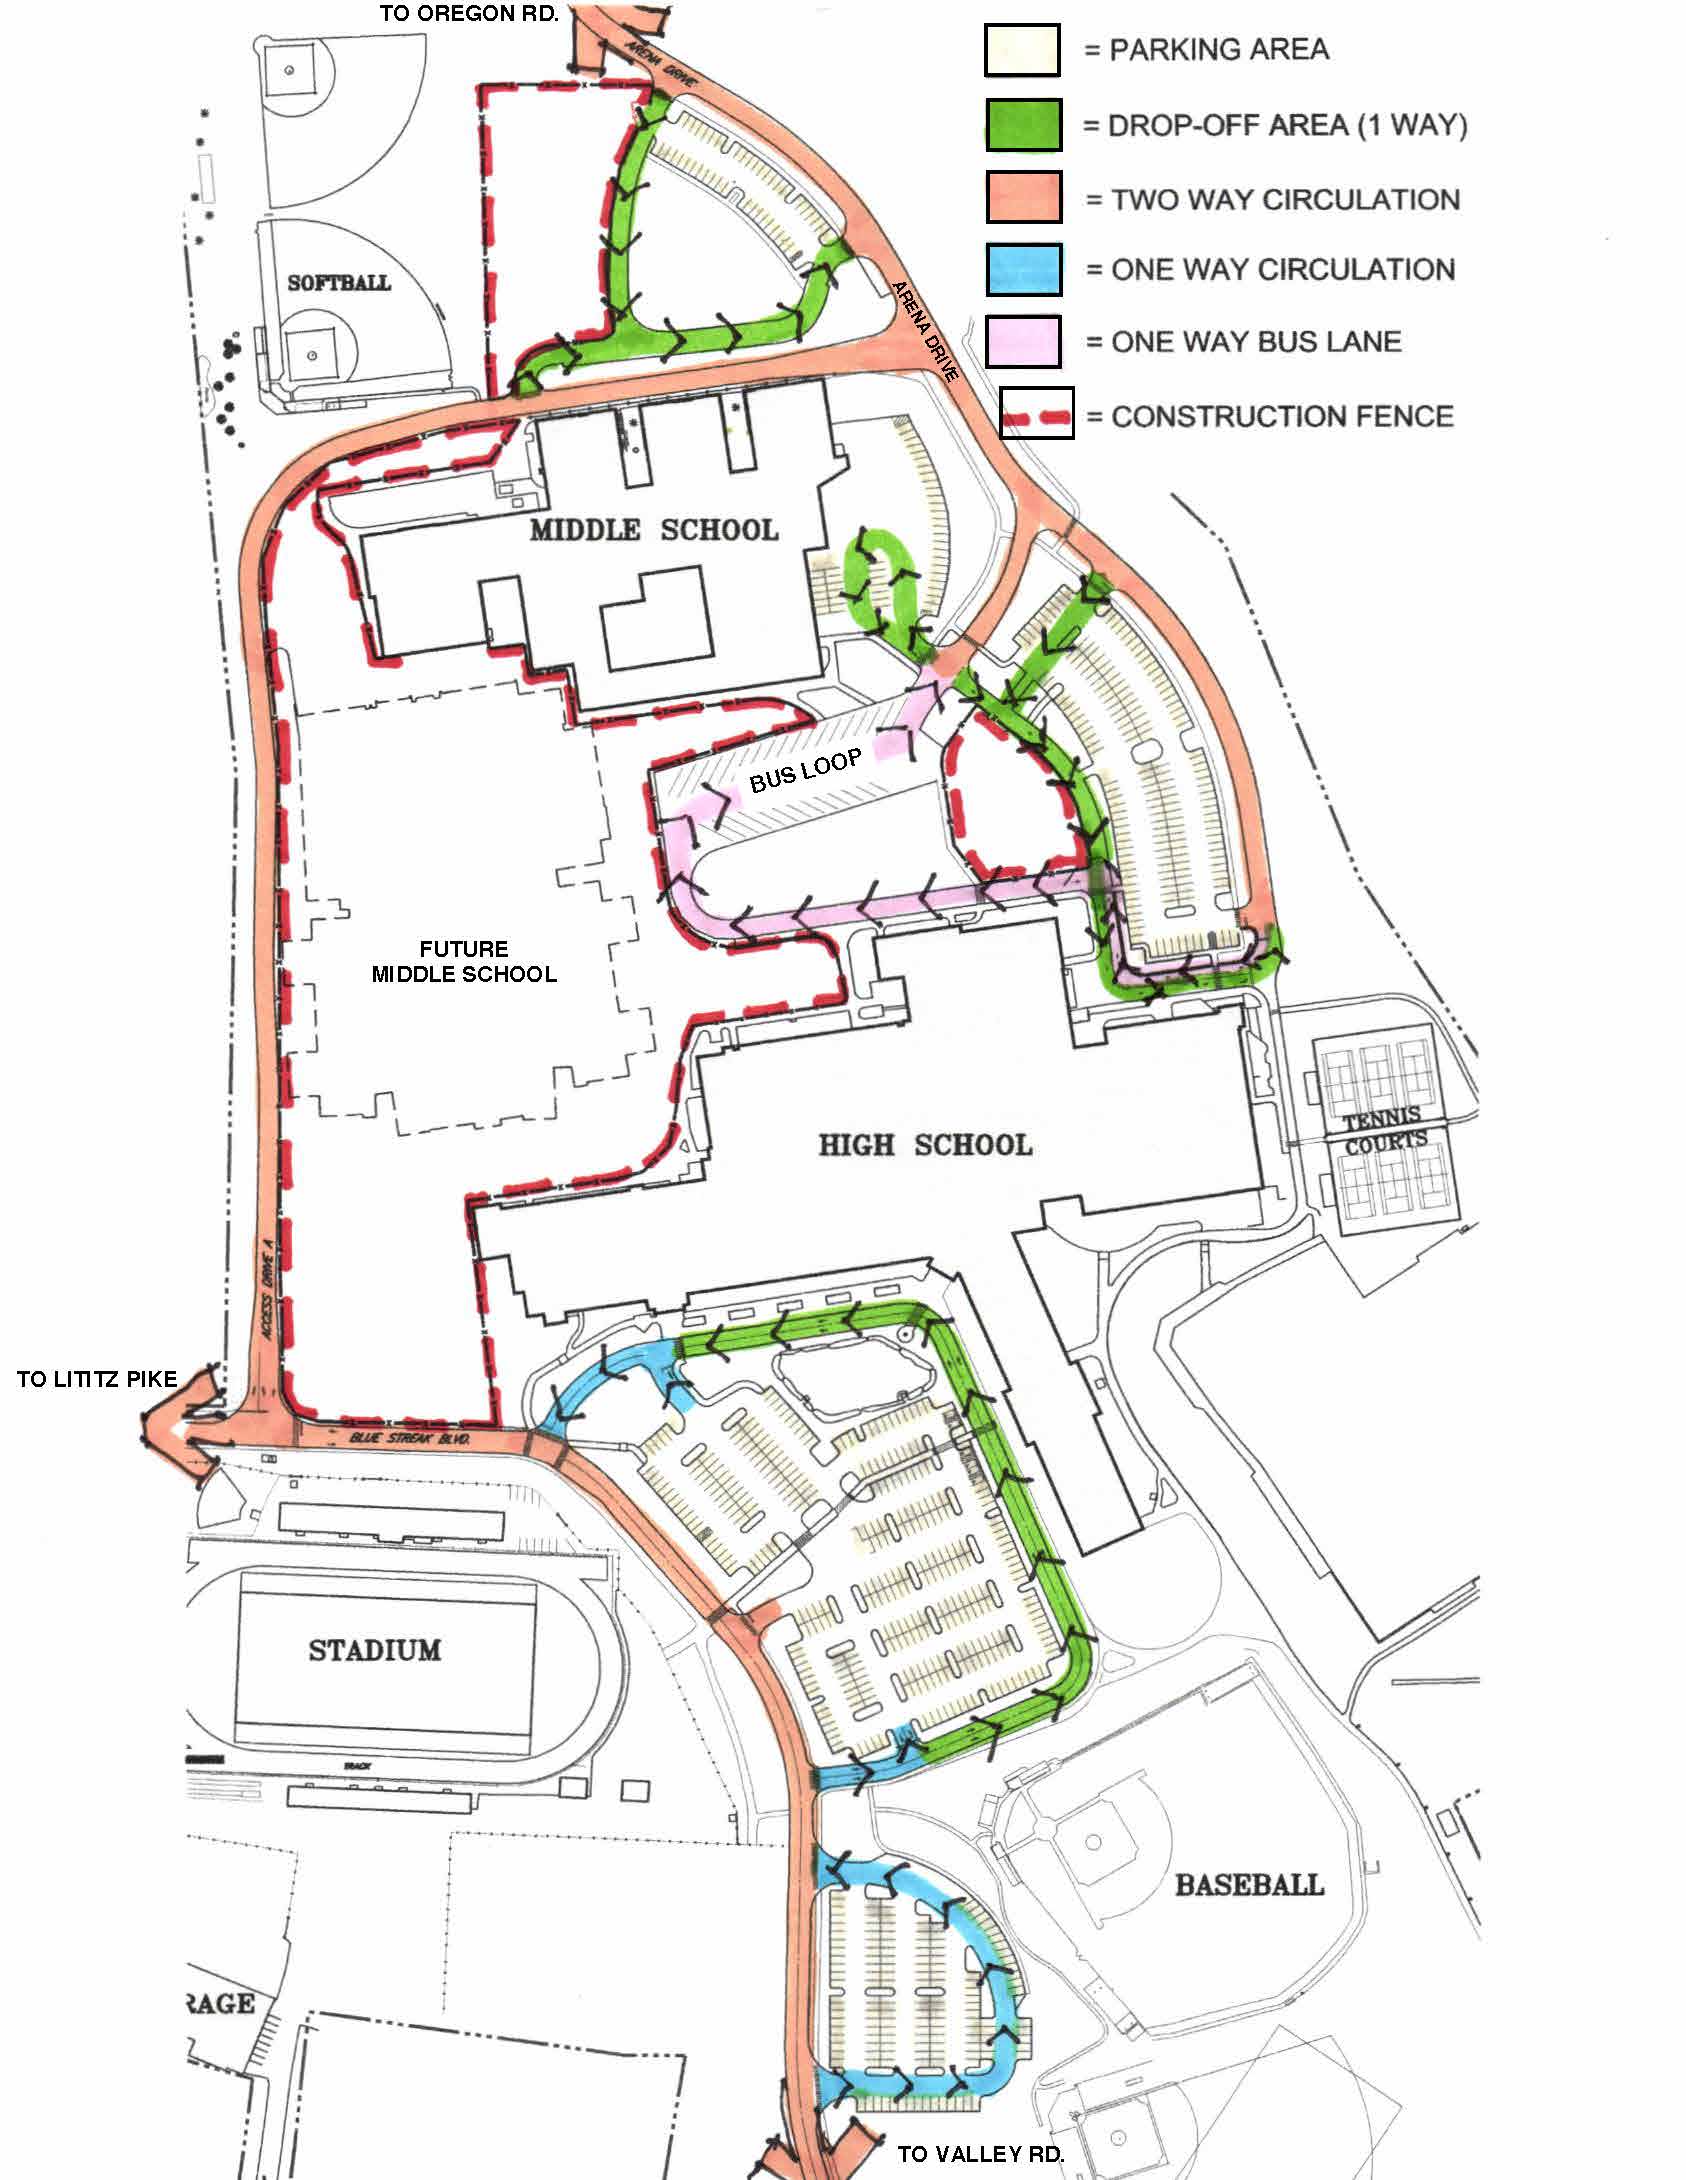 Map of traffic circulation for MTHS/MTMS Campus